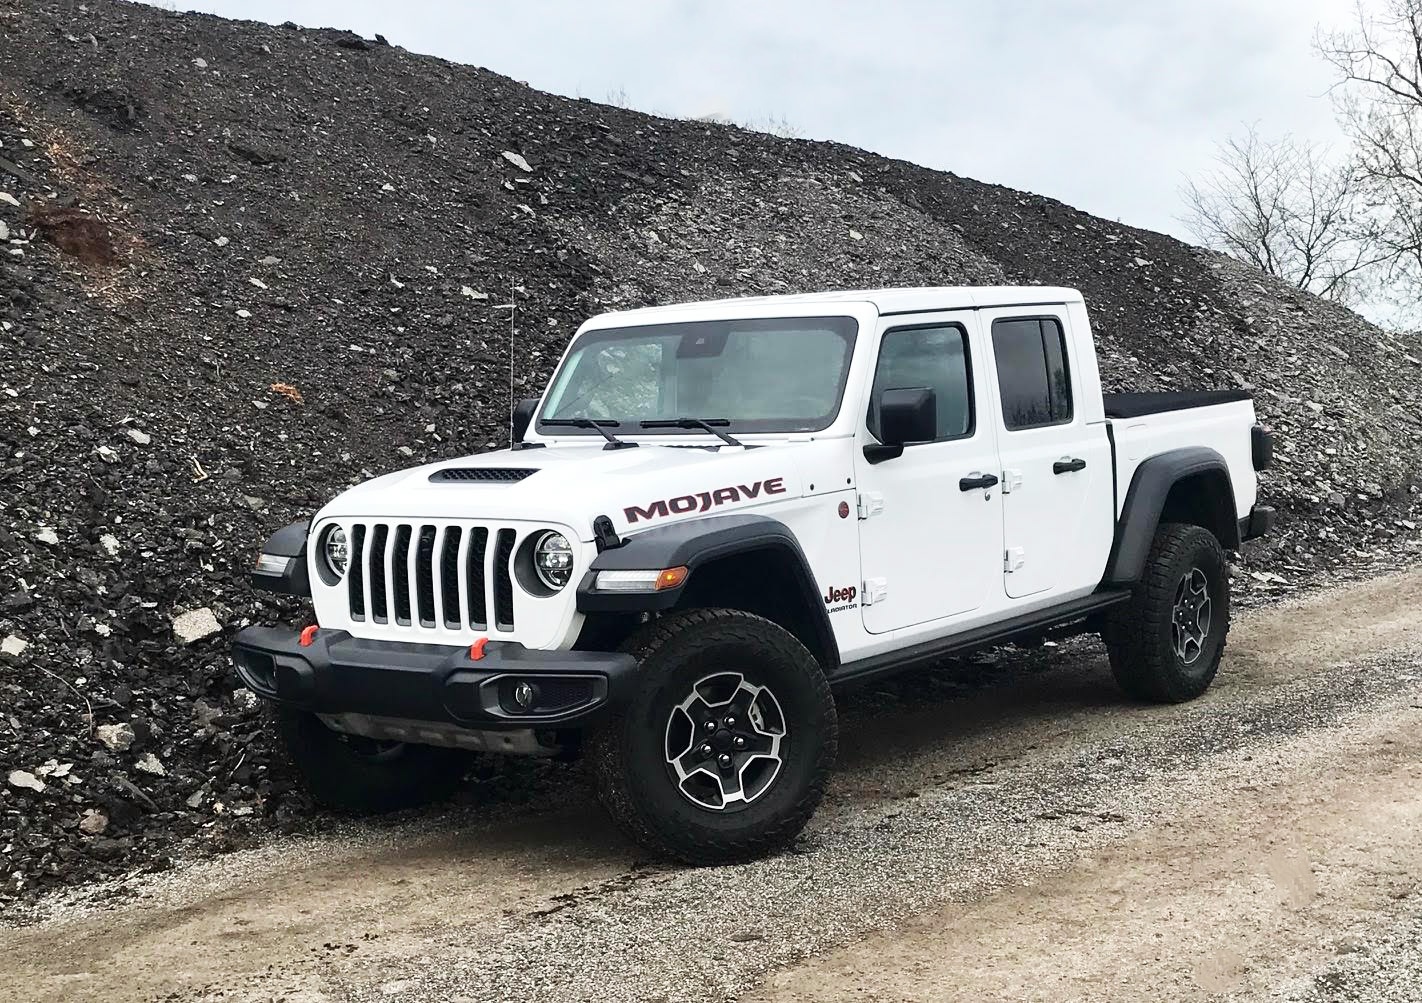 Test Drive: 2020 Jeep Gladiator Mojave | The Daily Drive | Consumer Guide®  The Daily Drive | Consumer Guide®